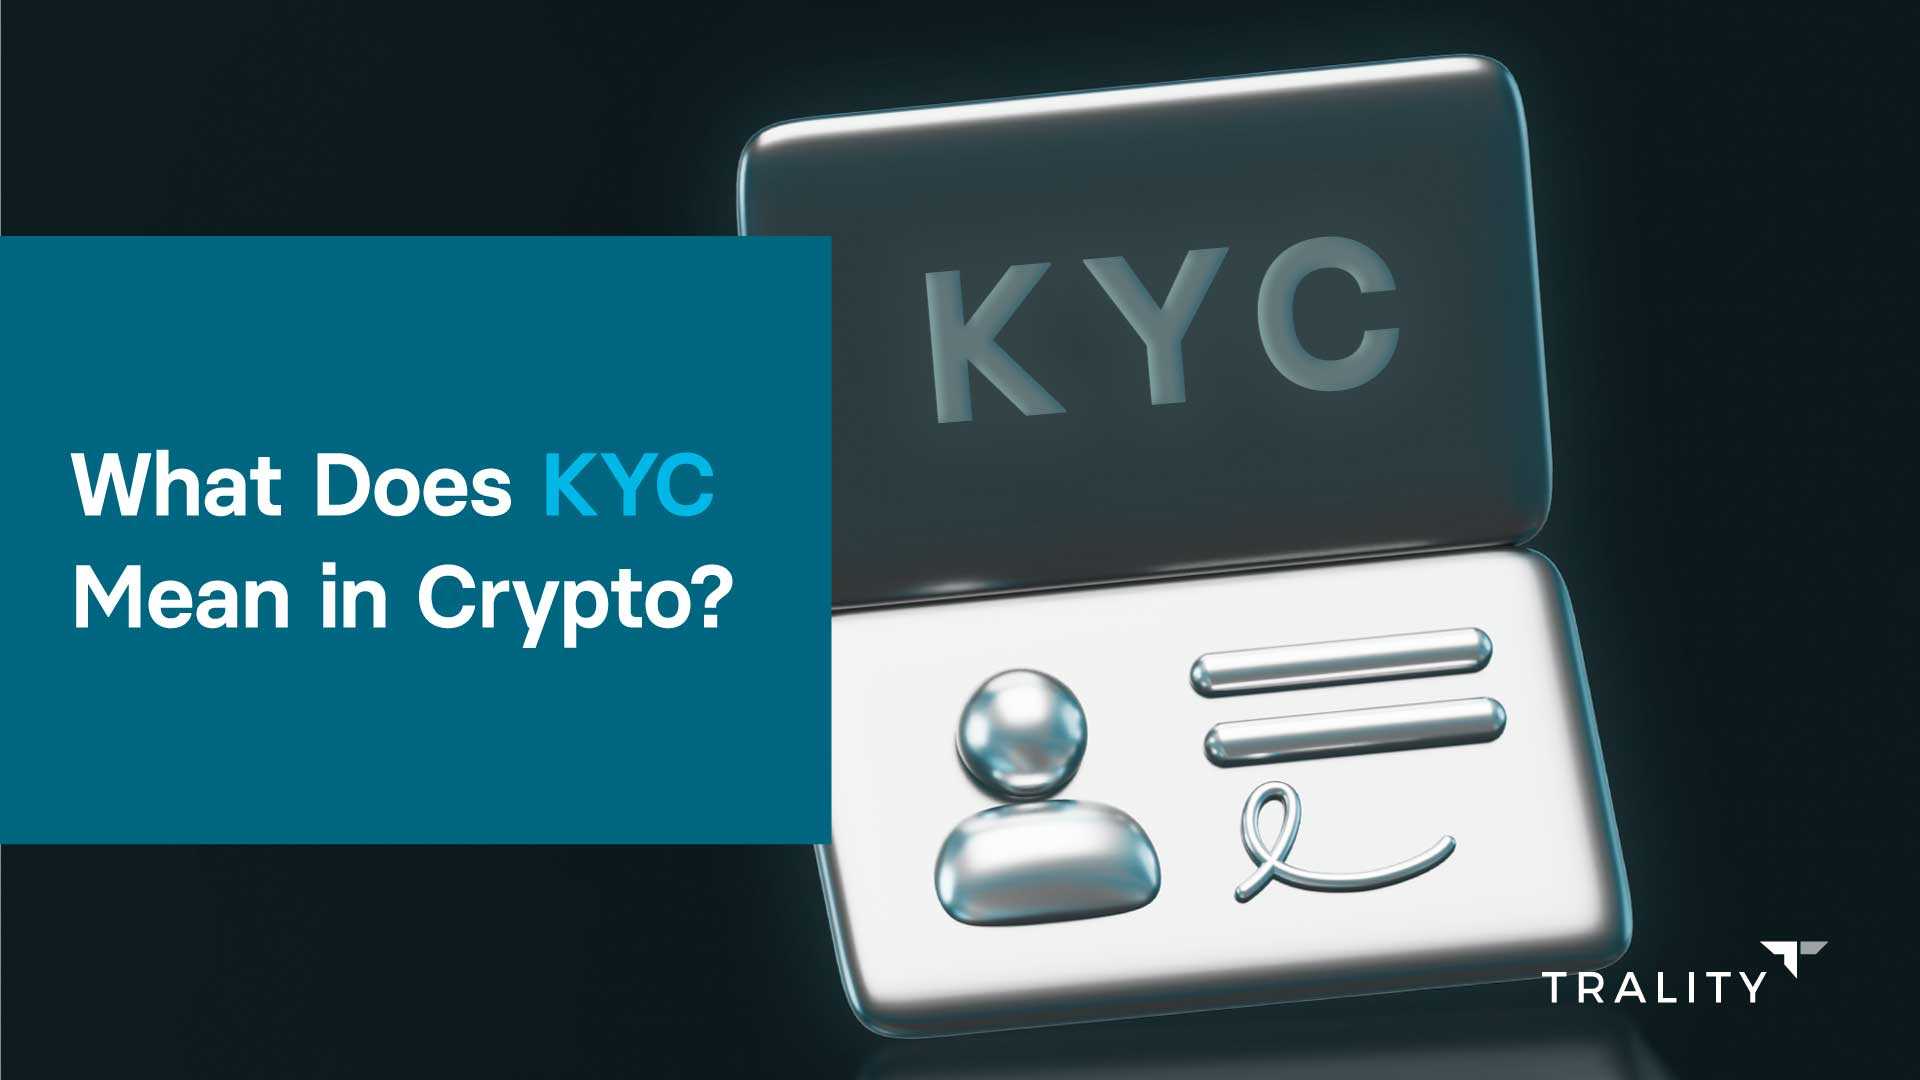 Kyc cryptocurrency meaning usa bitcoin market